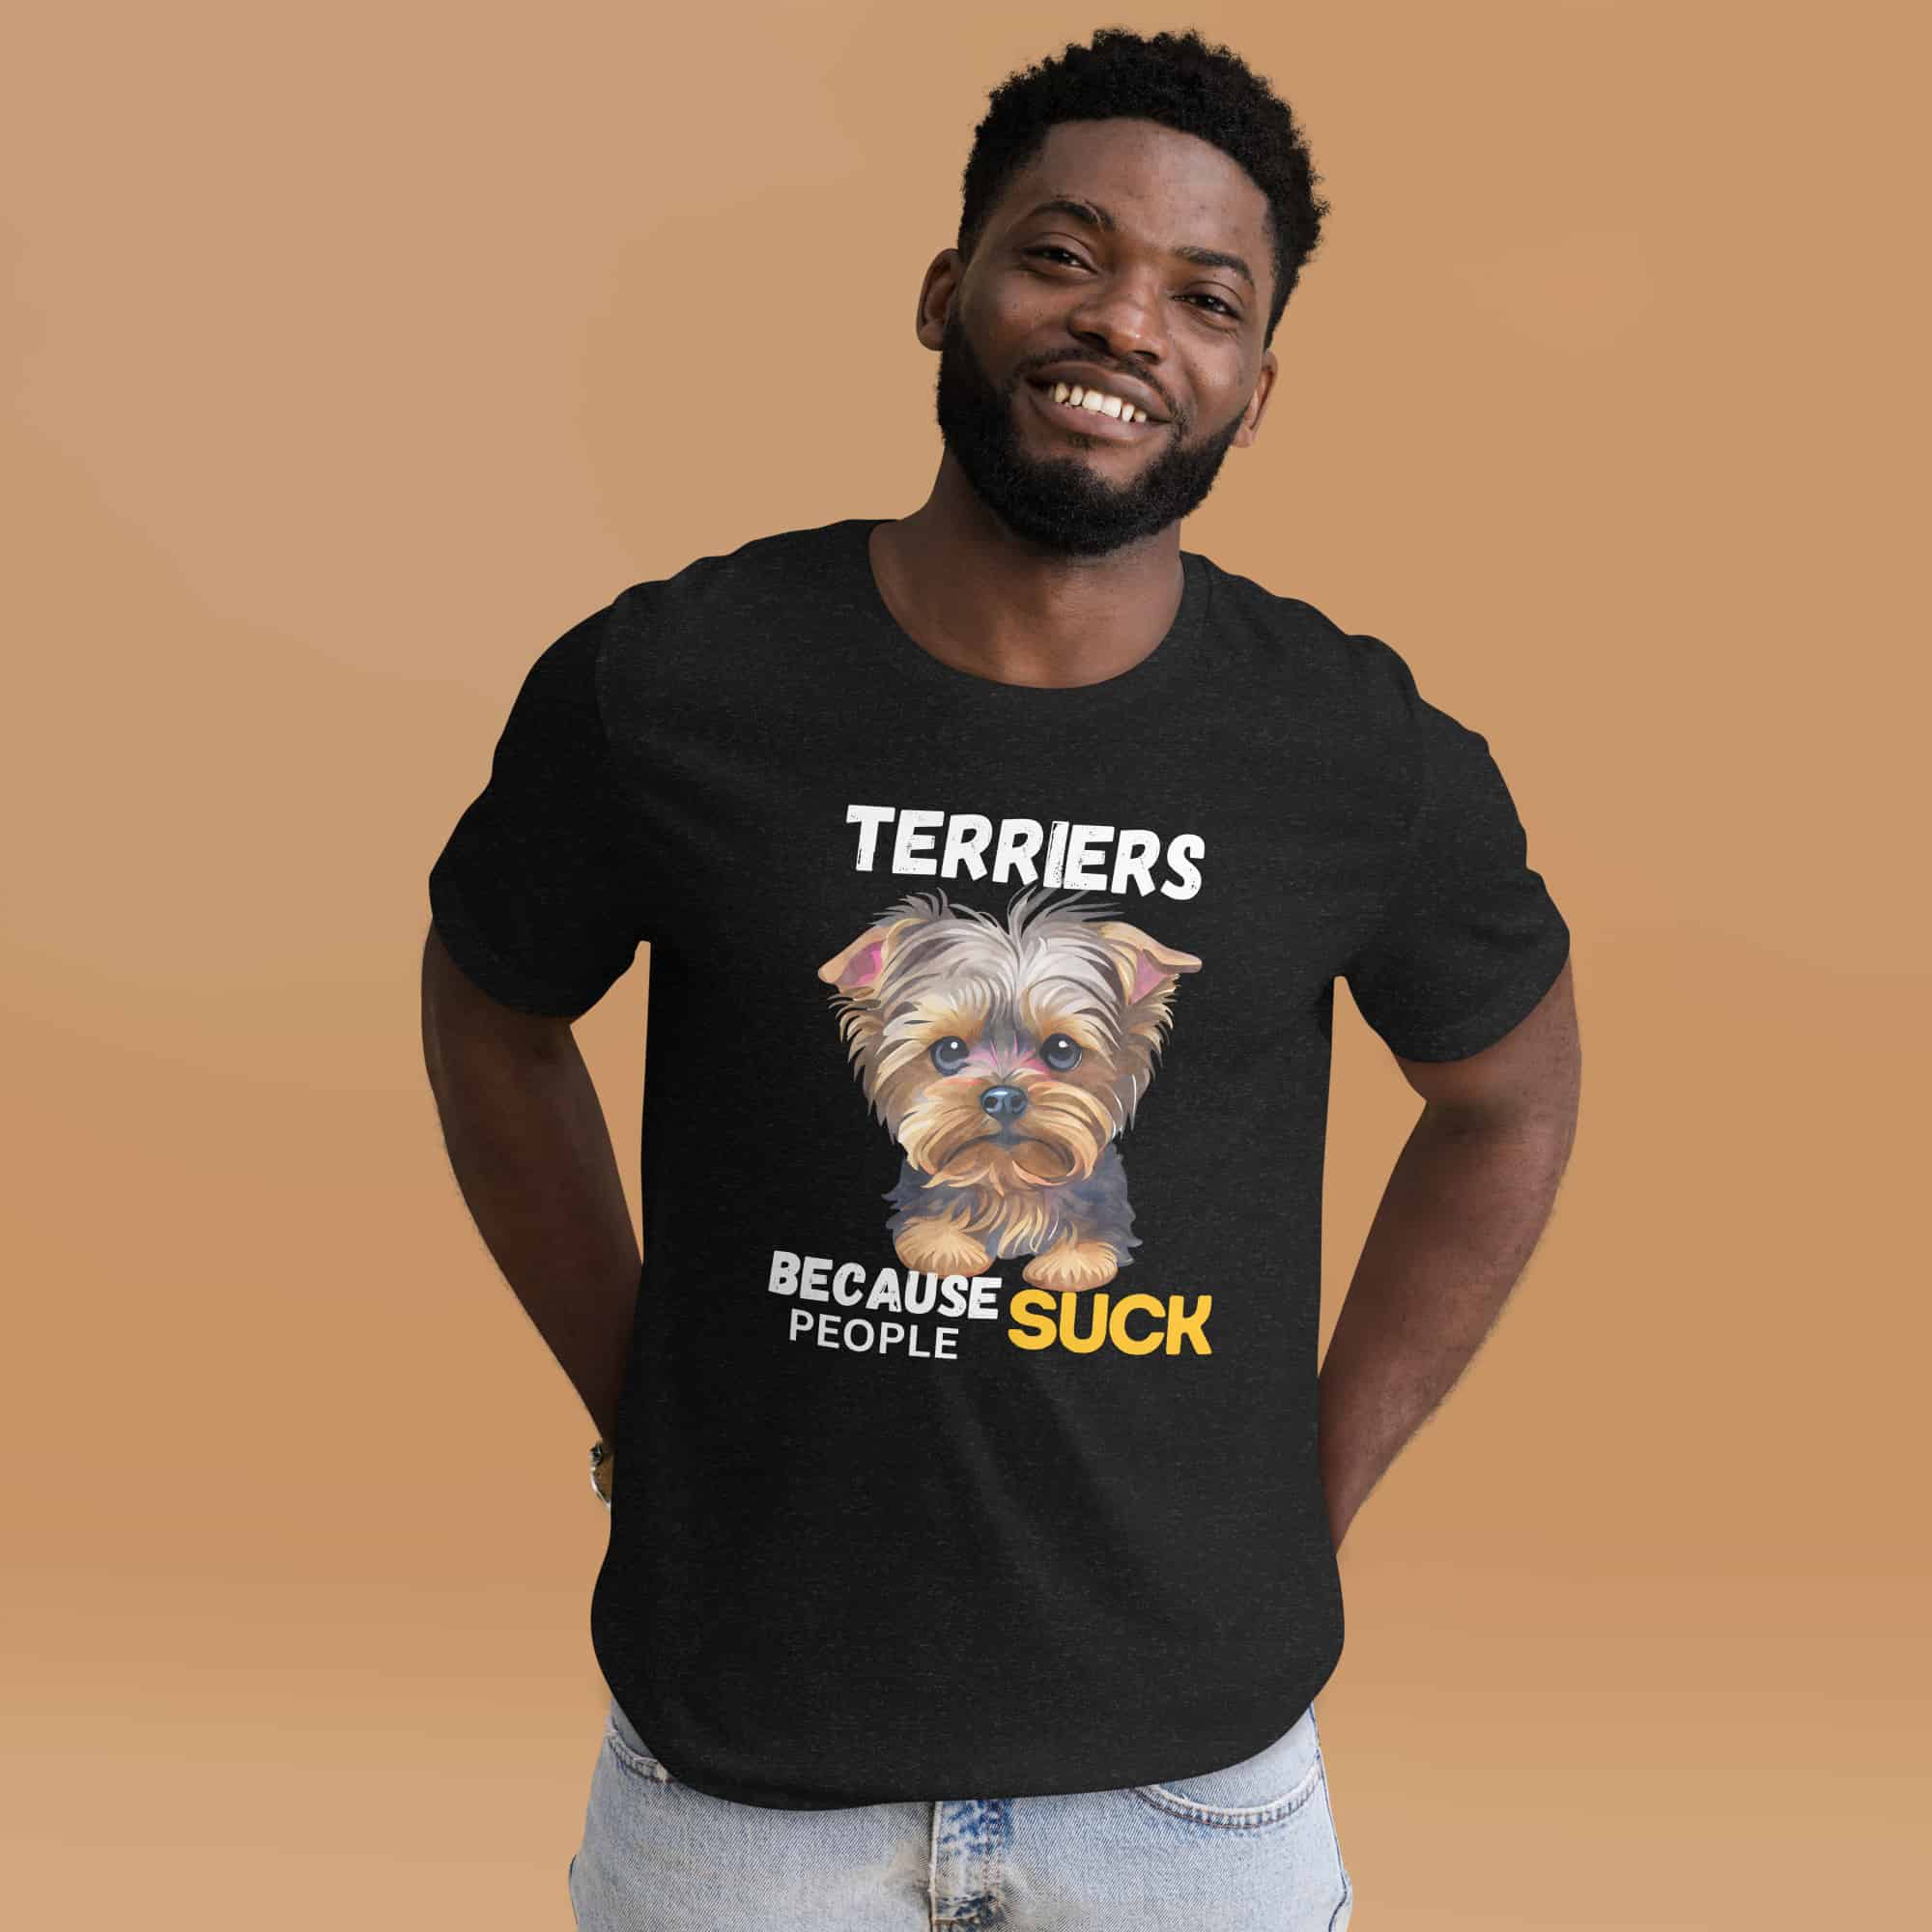 Terriers Because People Suck Unisex T-Shirt male t